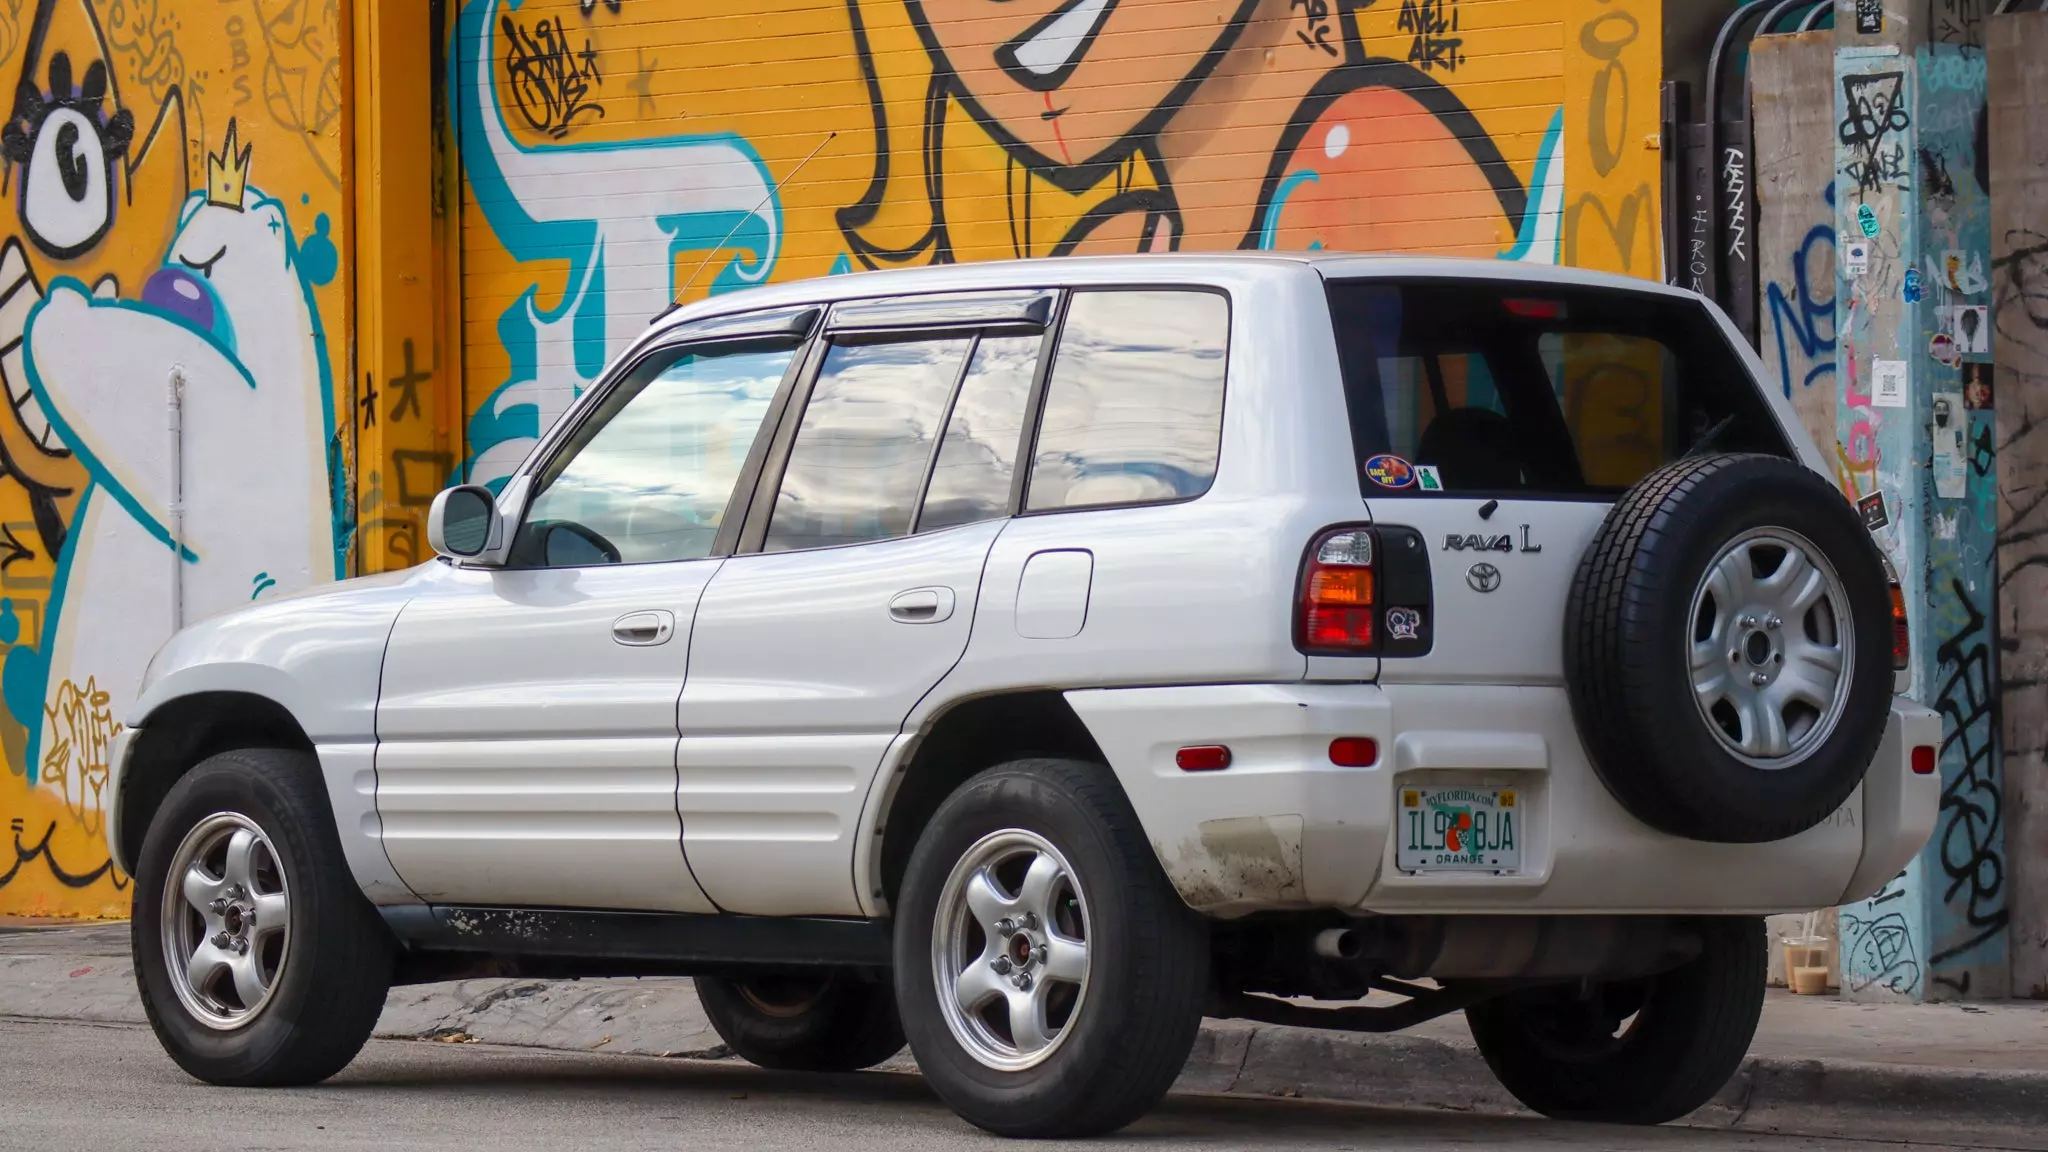 This RAV4 Parked in Miami Felt Like a Clue to the Area&#8217;s History